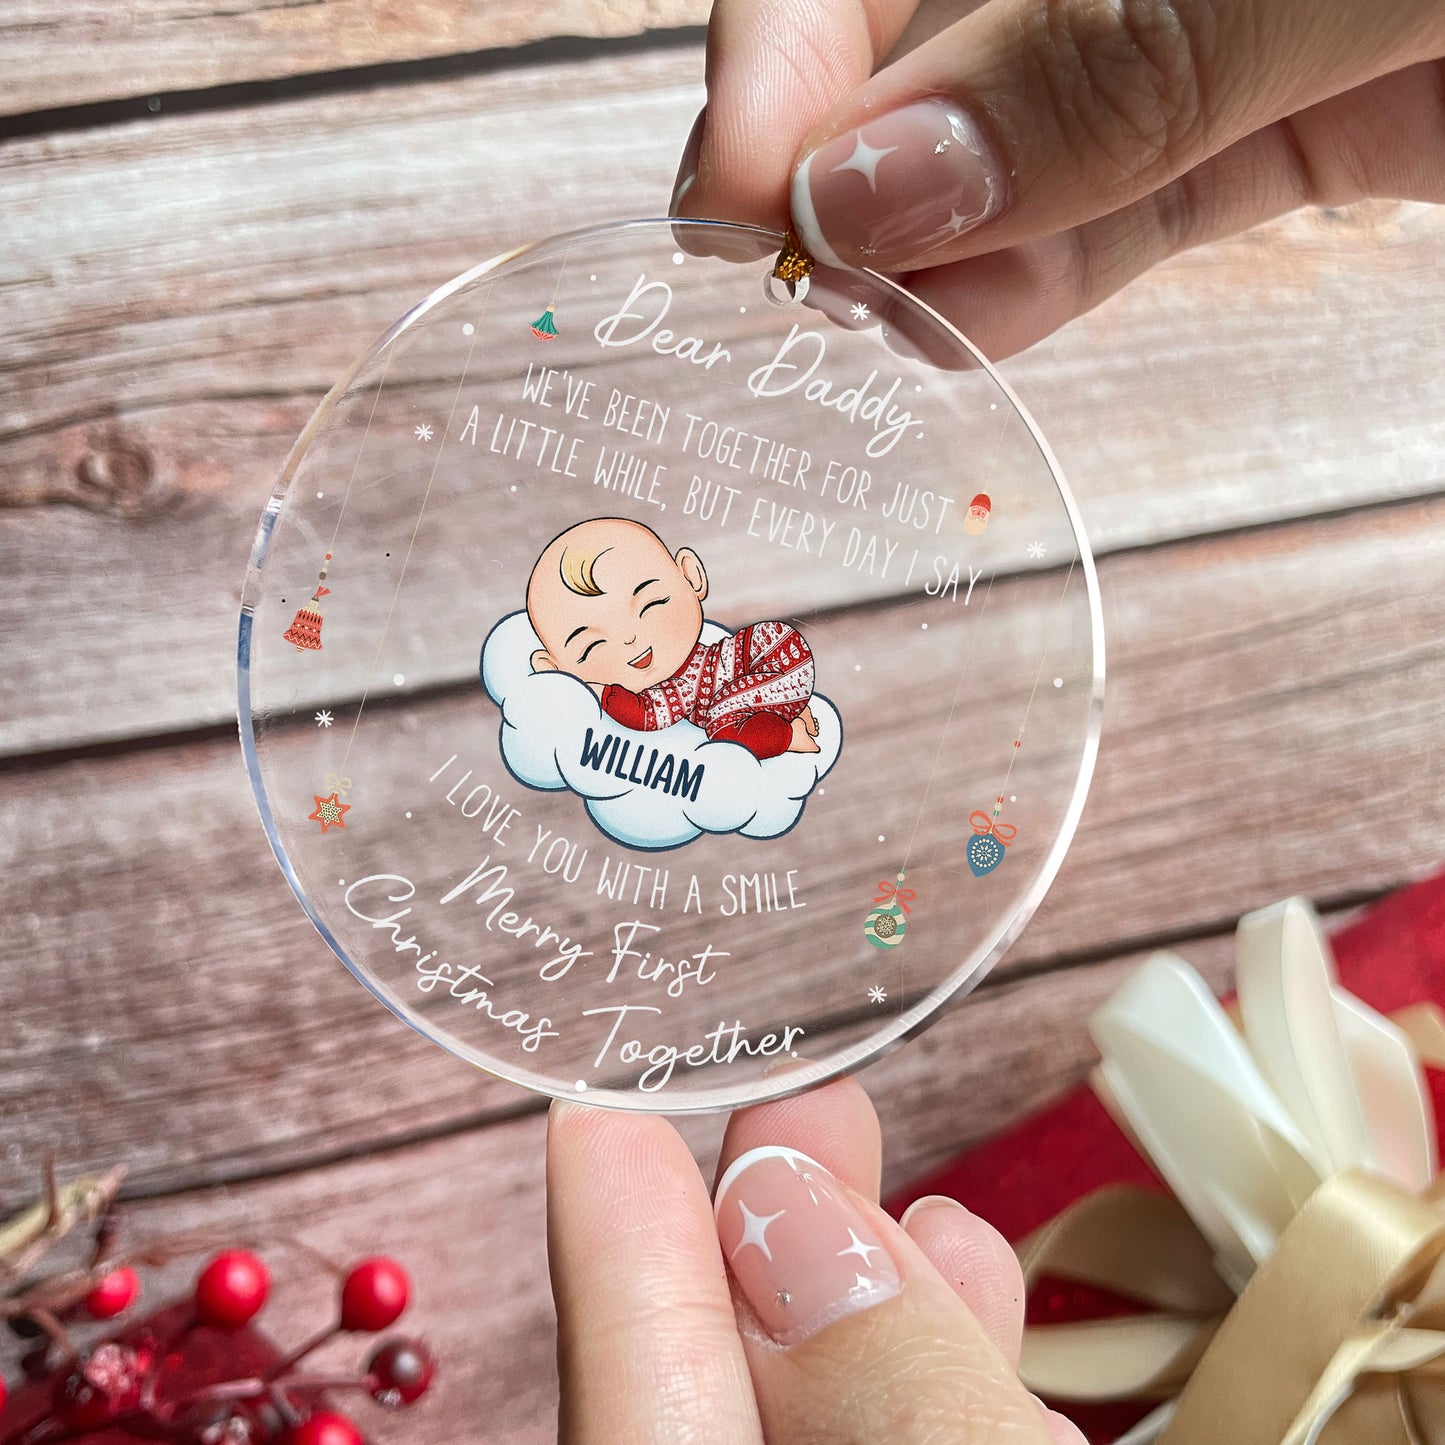 We've Been Together For Just A Little While - Personalized Acrylic Ornament